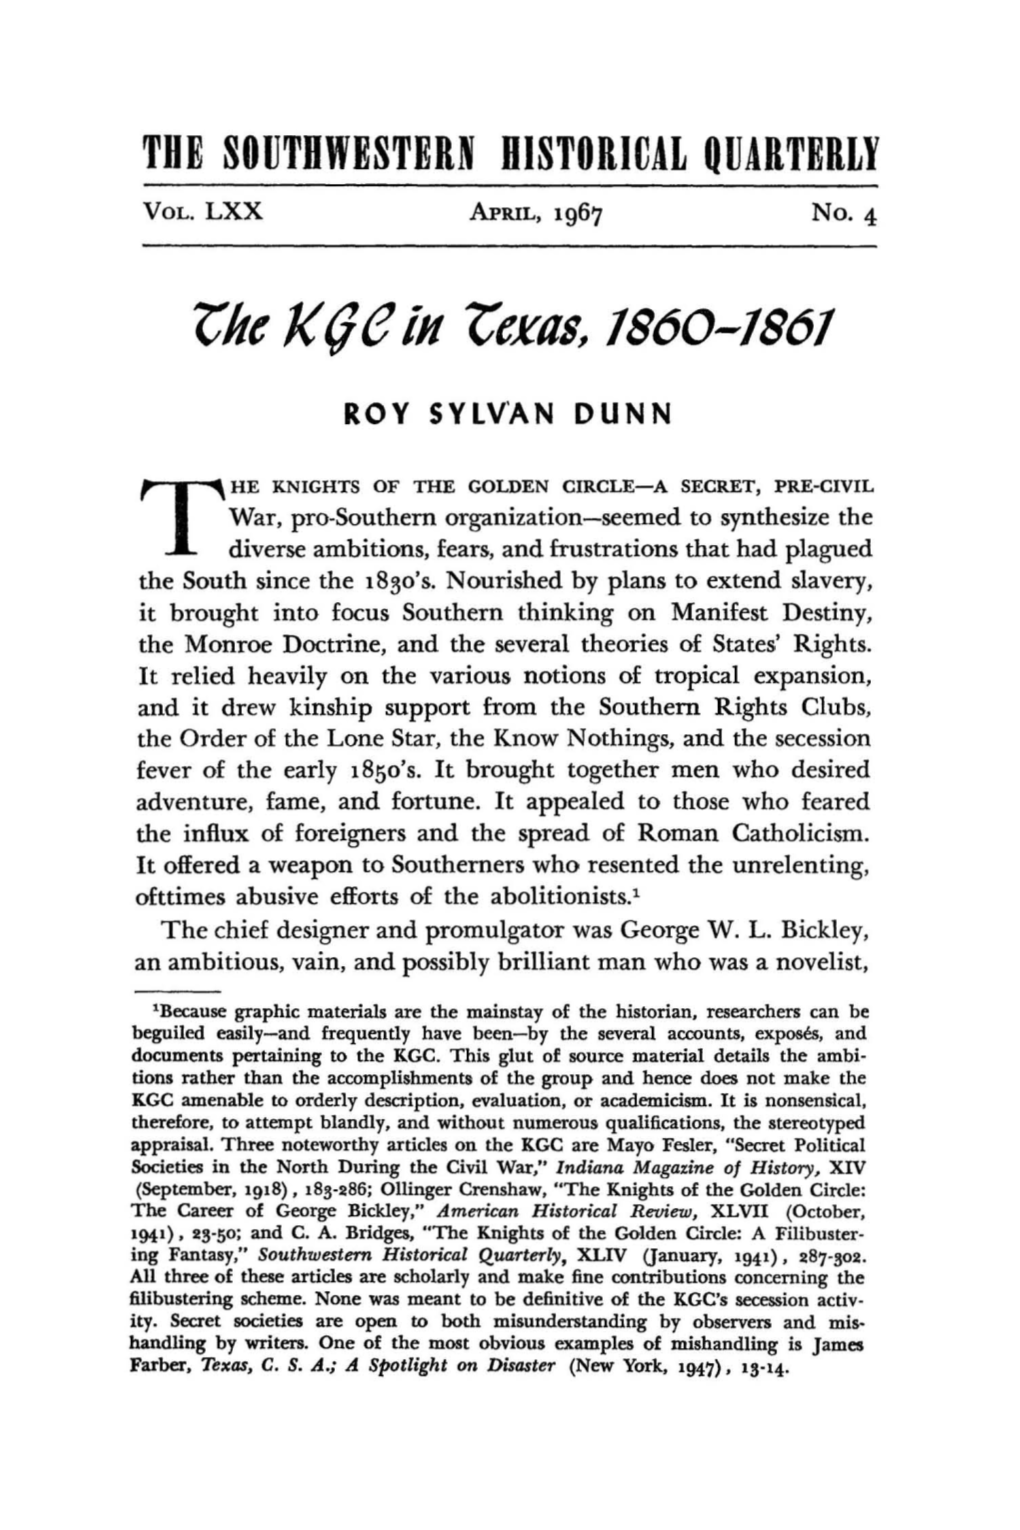 The KGC in Texas, 1860-1861